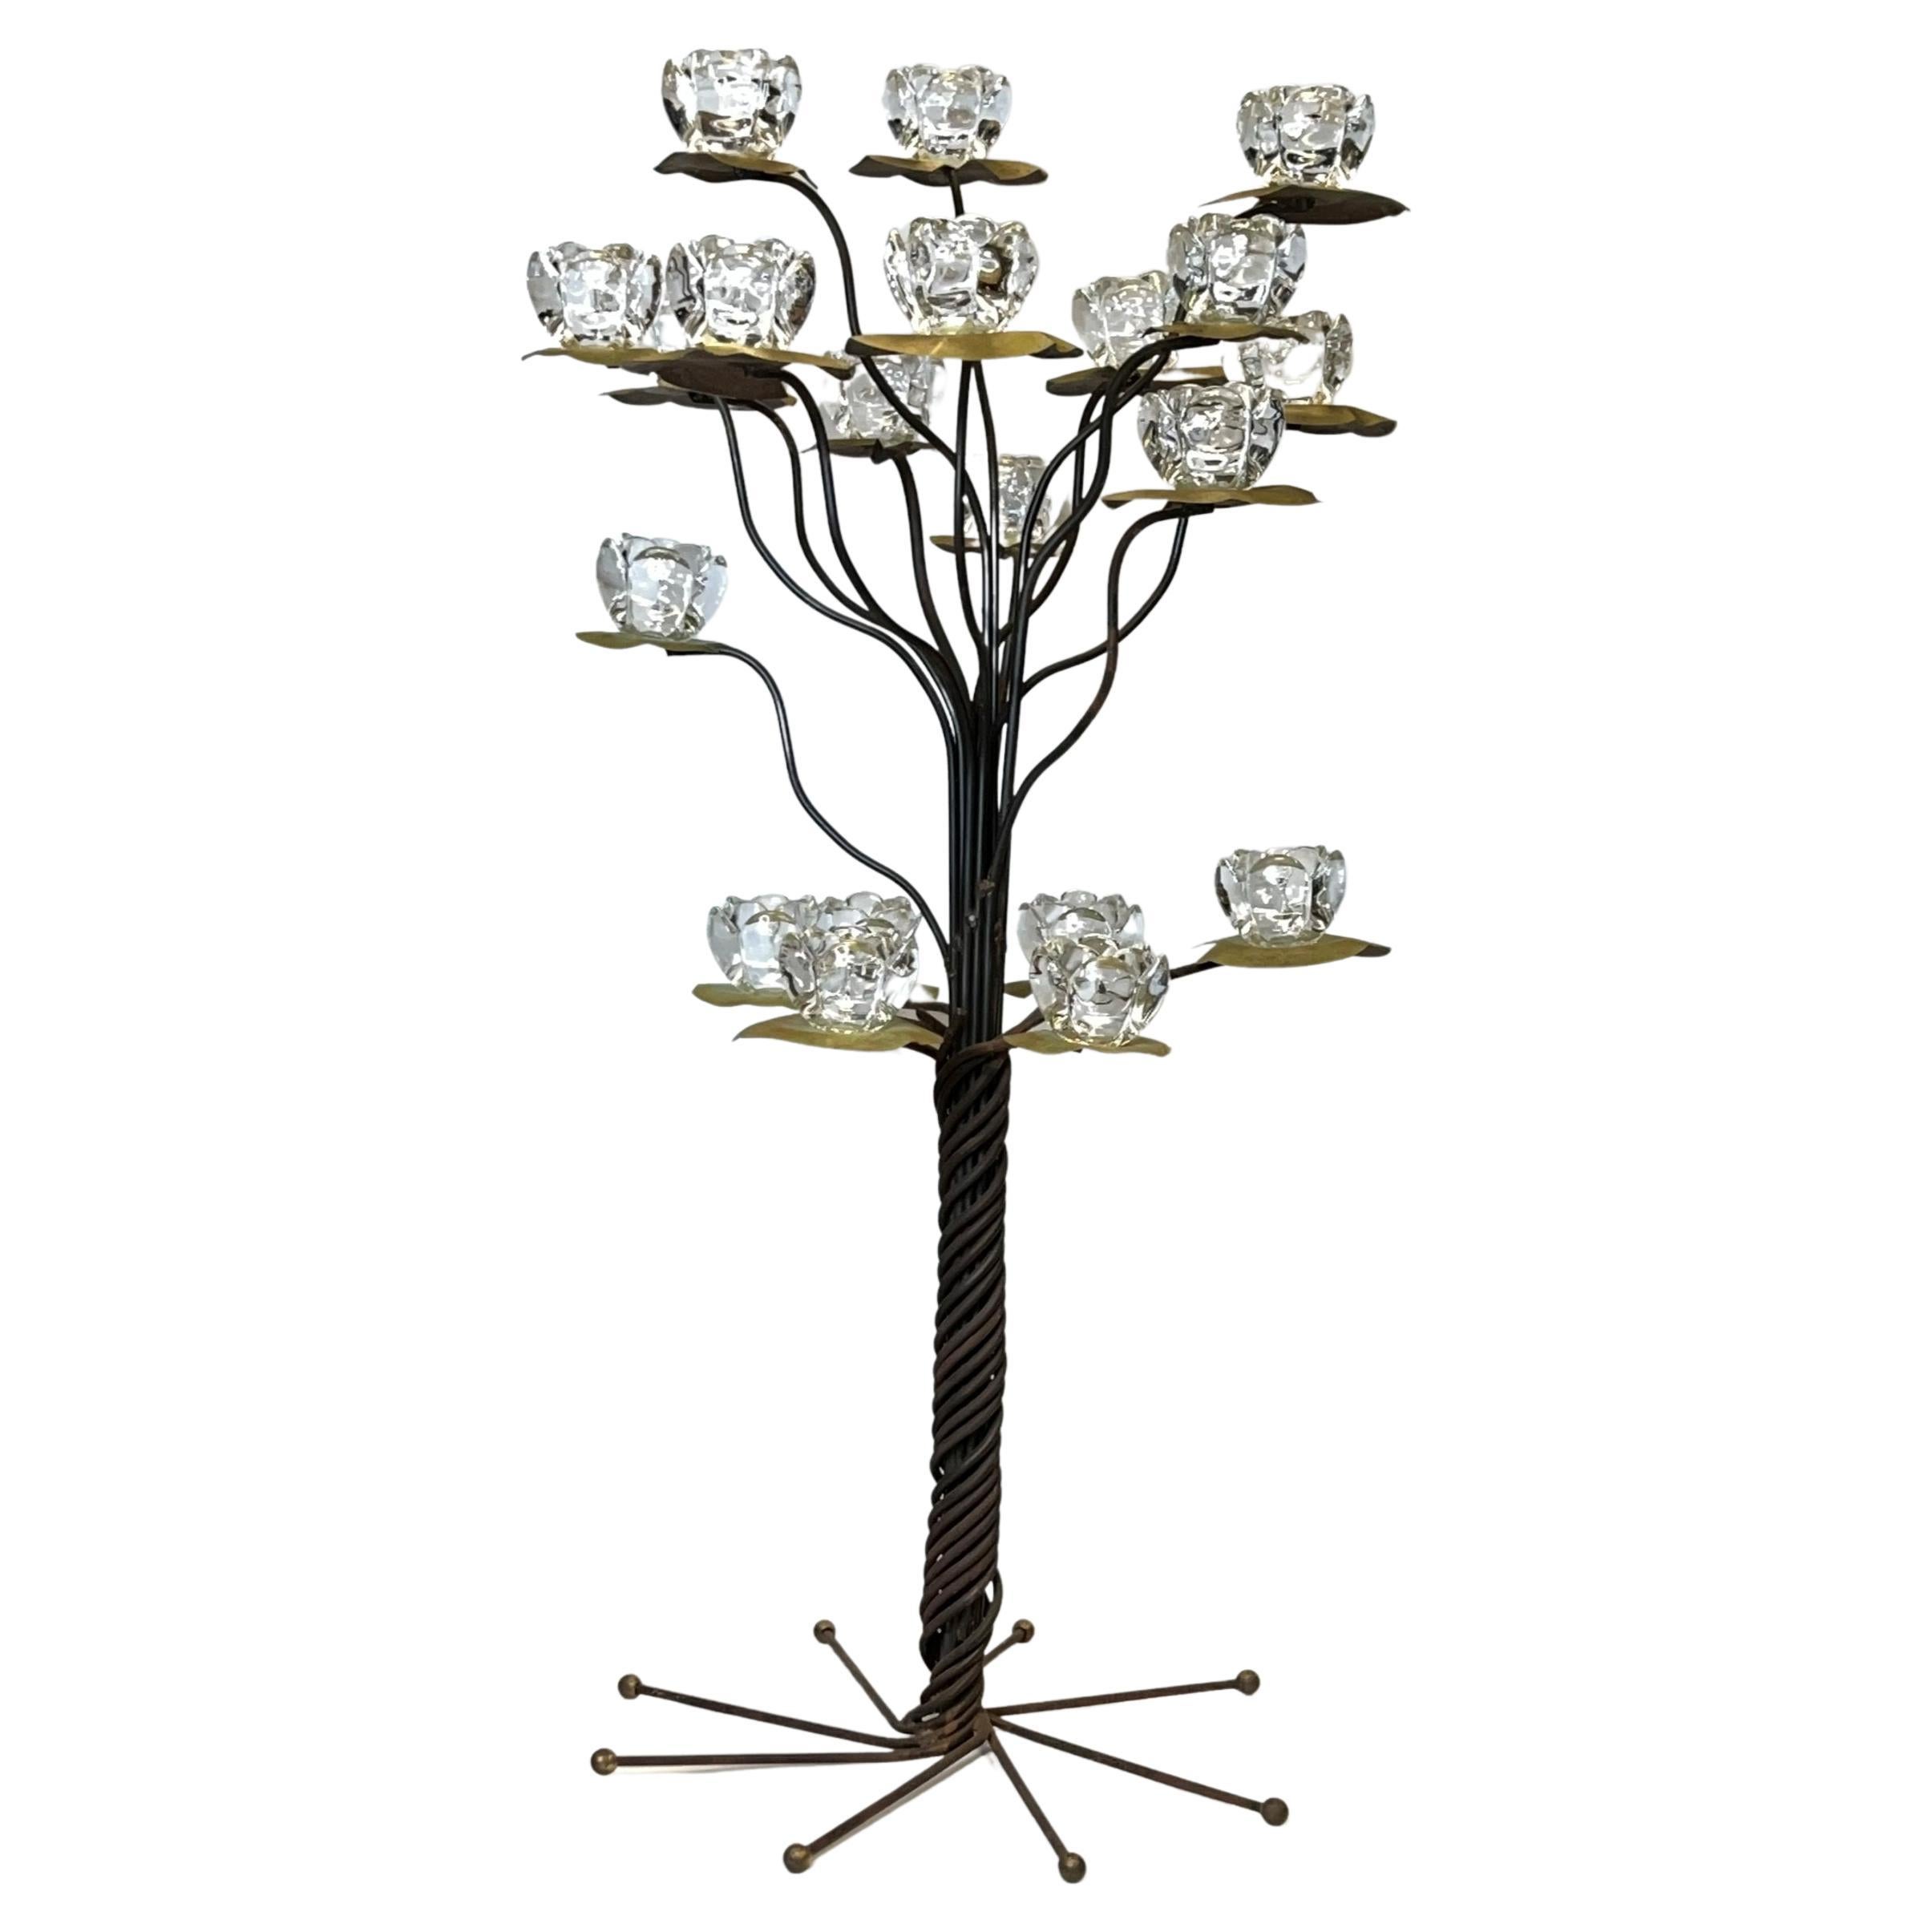 Mid-Century Modern Iron and Copper Floor Candelabra with Crystal Candle Holders For Sale